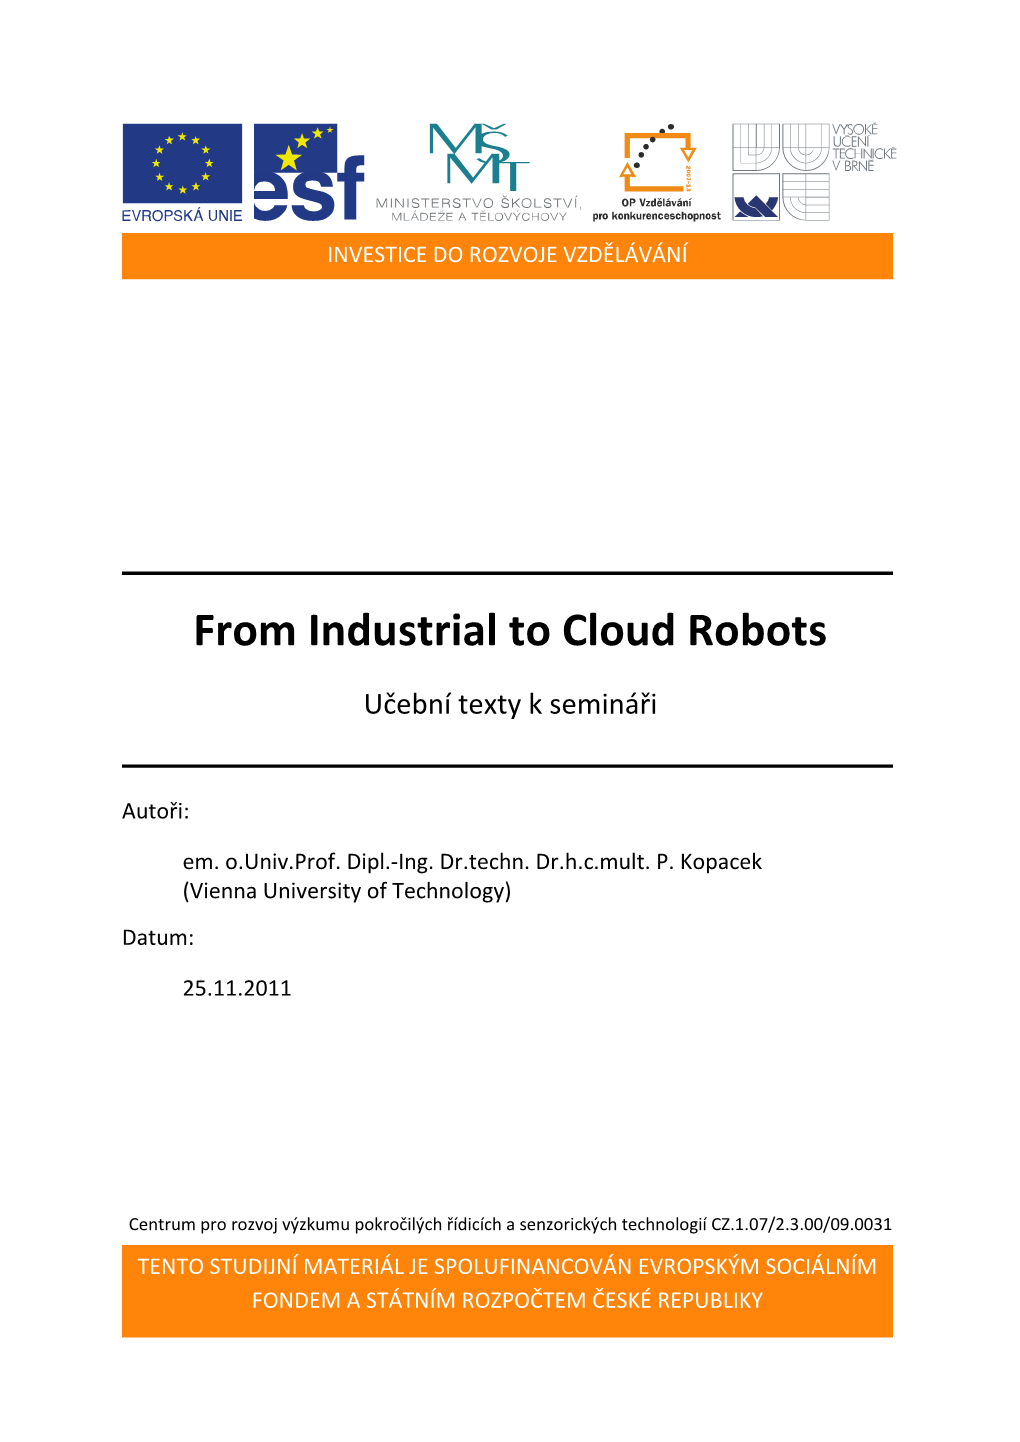 From Industrial to Cloud Robots